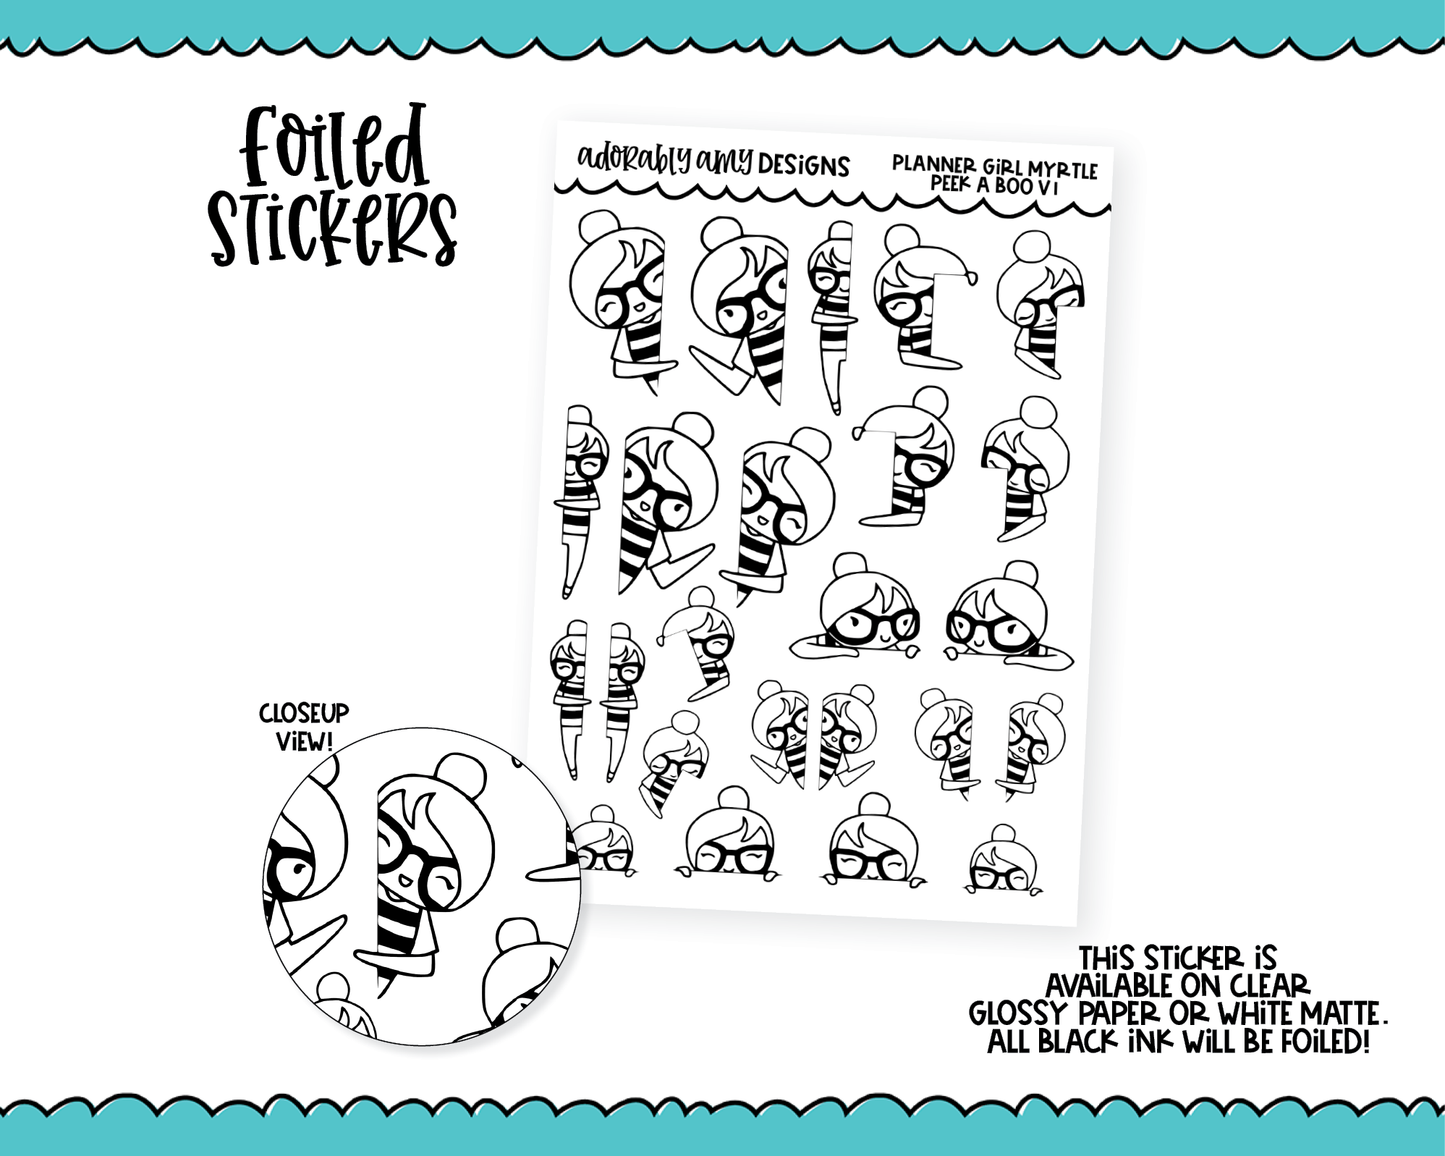 Foiled Doodled Planner Girls Peek a Boo V1 Edge Decoration Planner Stickers for any Planner or Insert